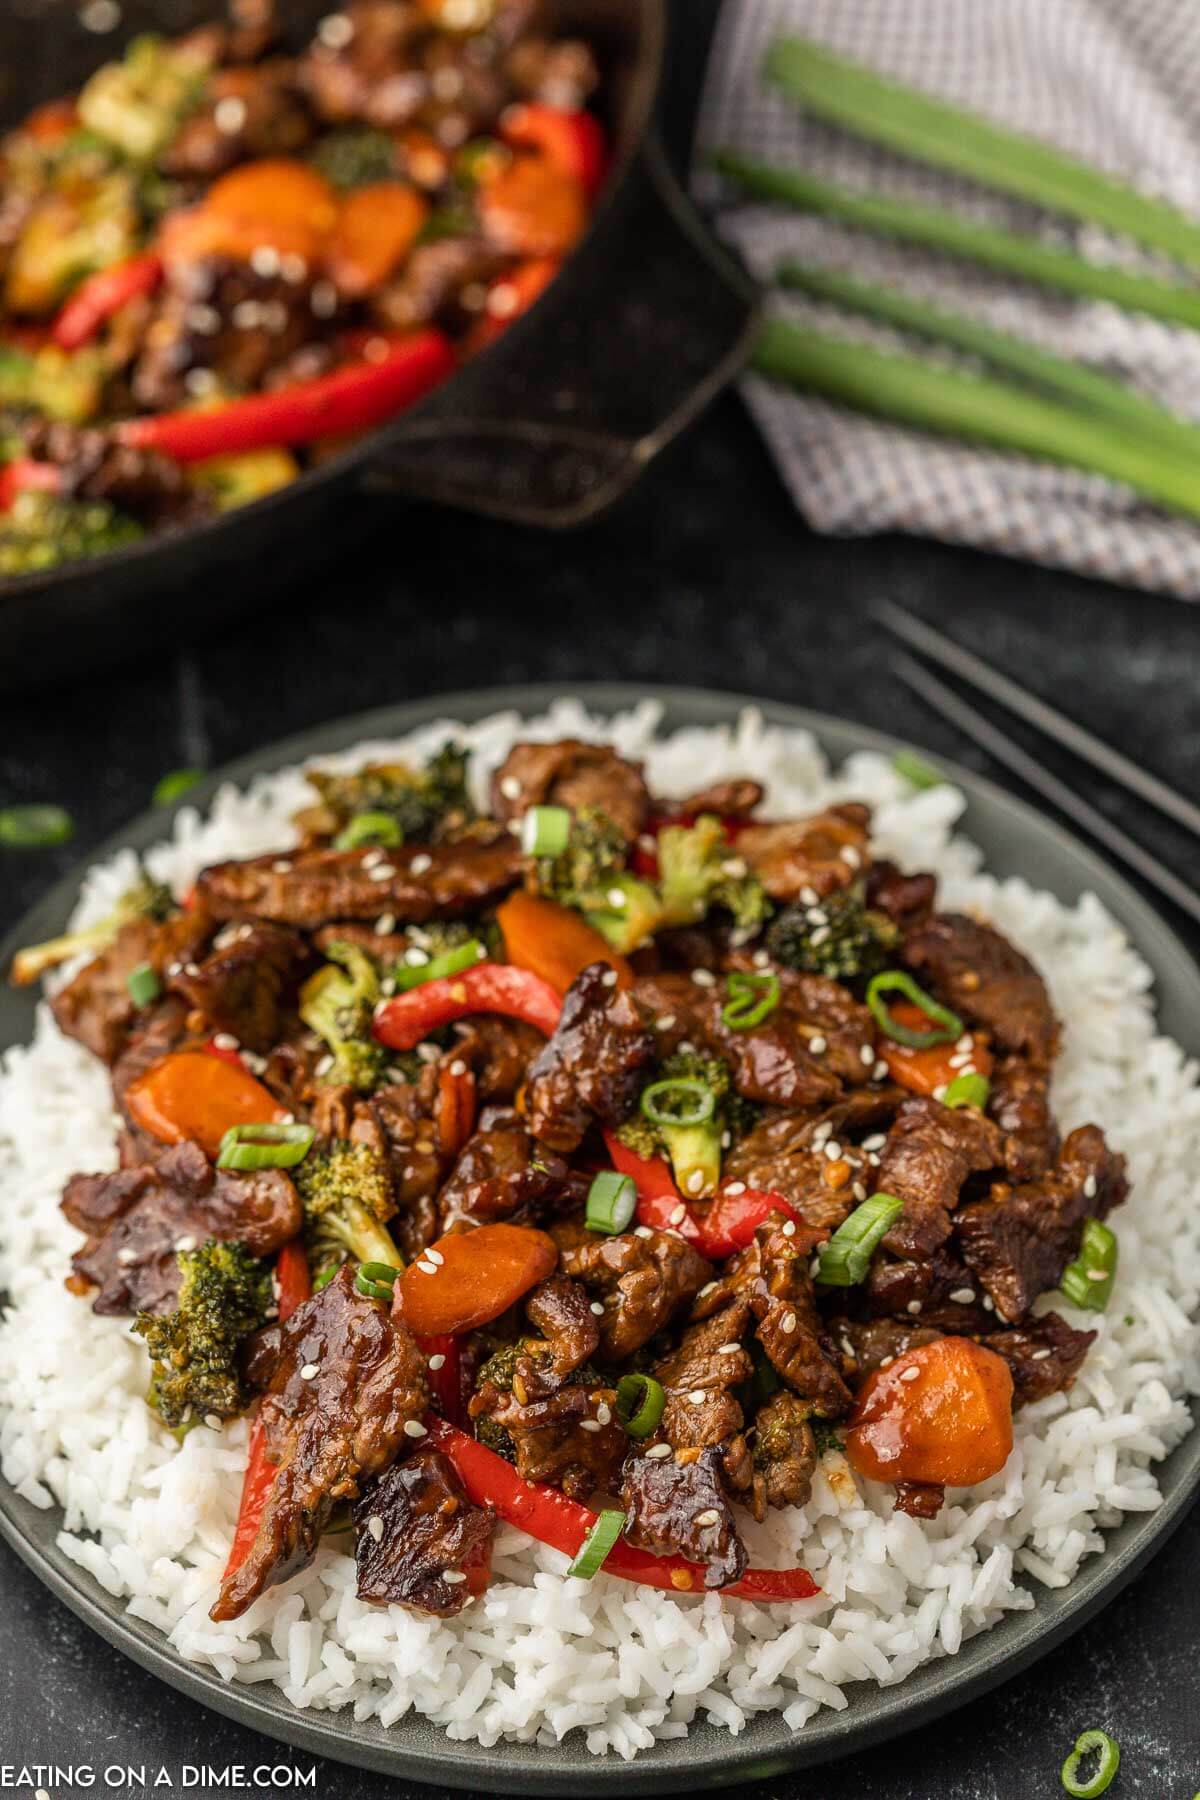 Beef Stir Fry on a plate of white rice